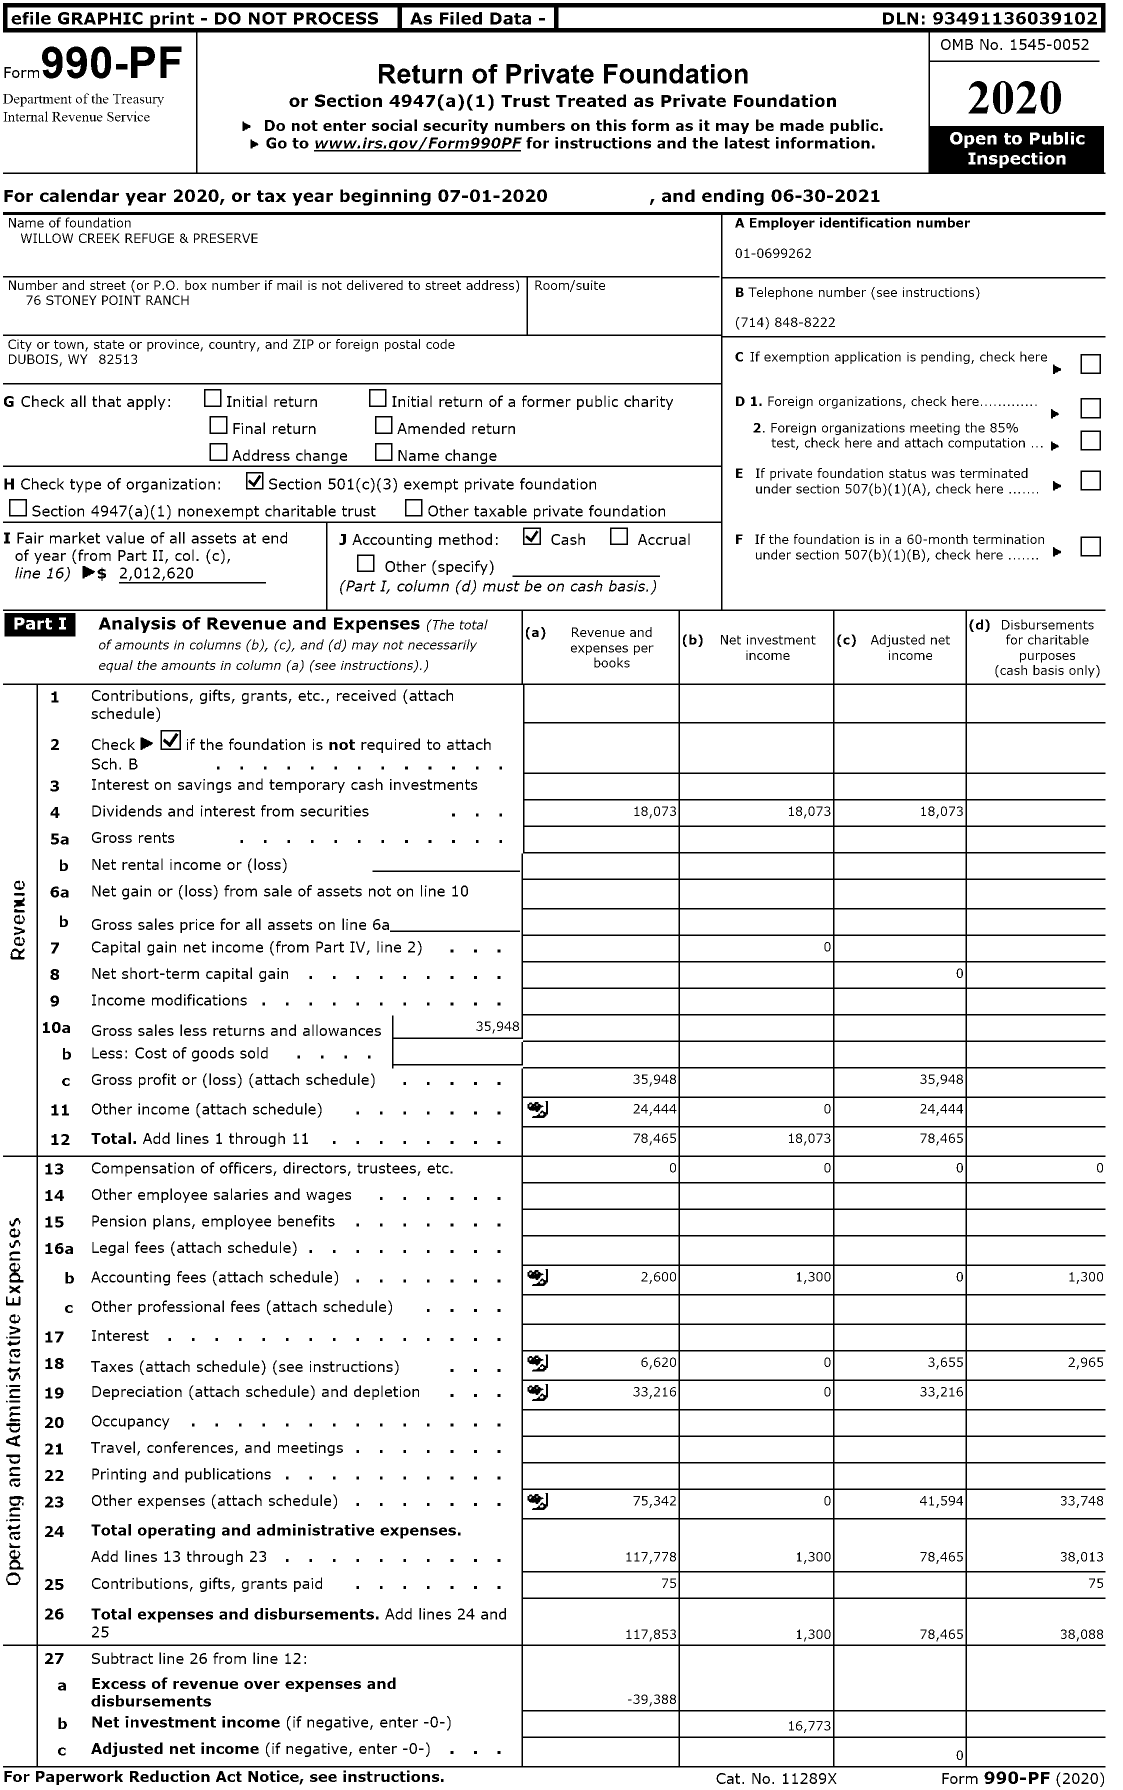 Image of first page of 2020 Form 990PF for Willow Creek Refuge and Preserve